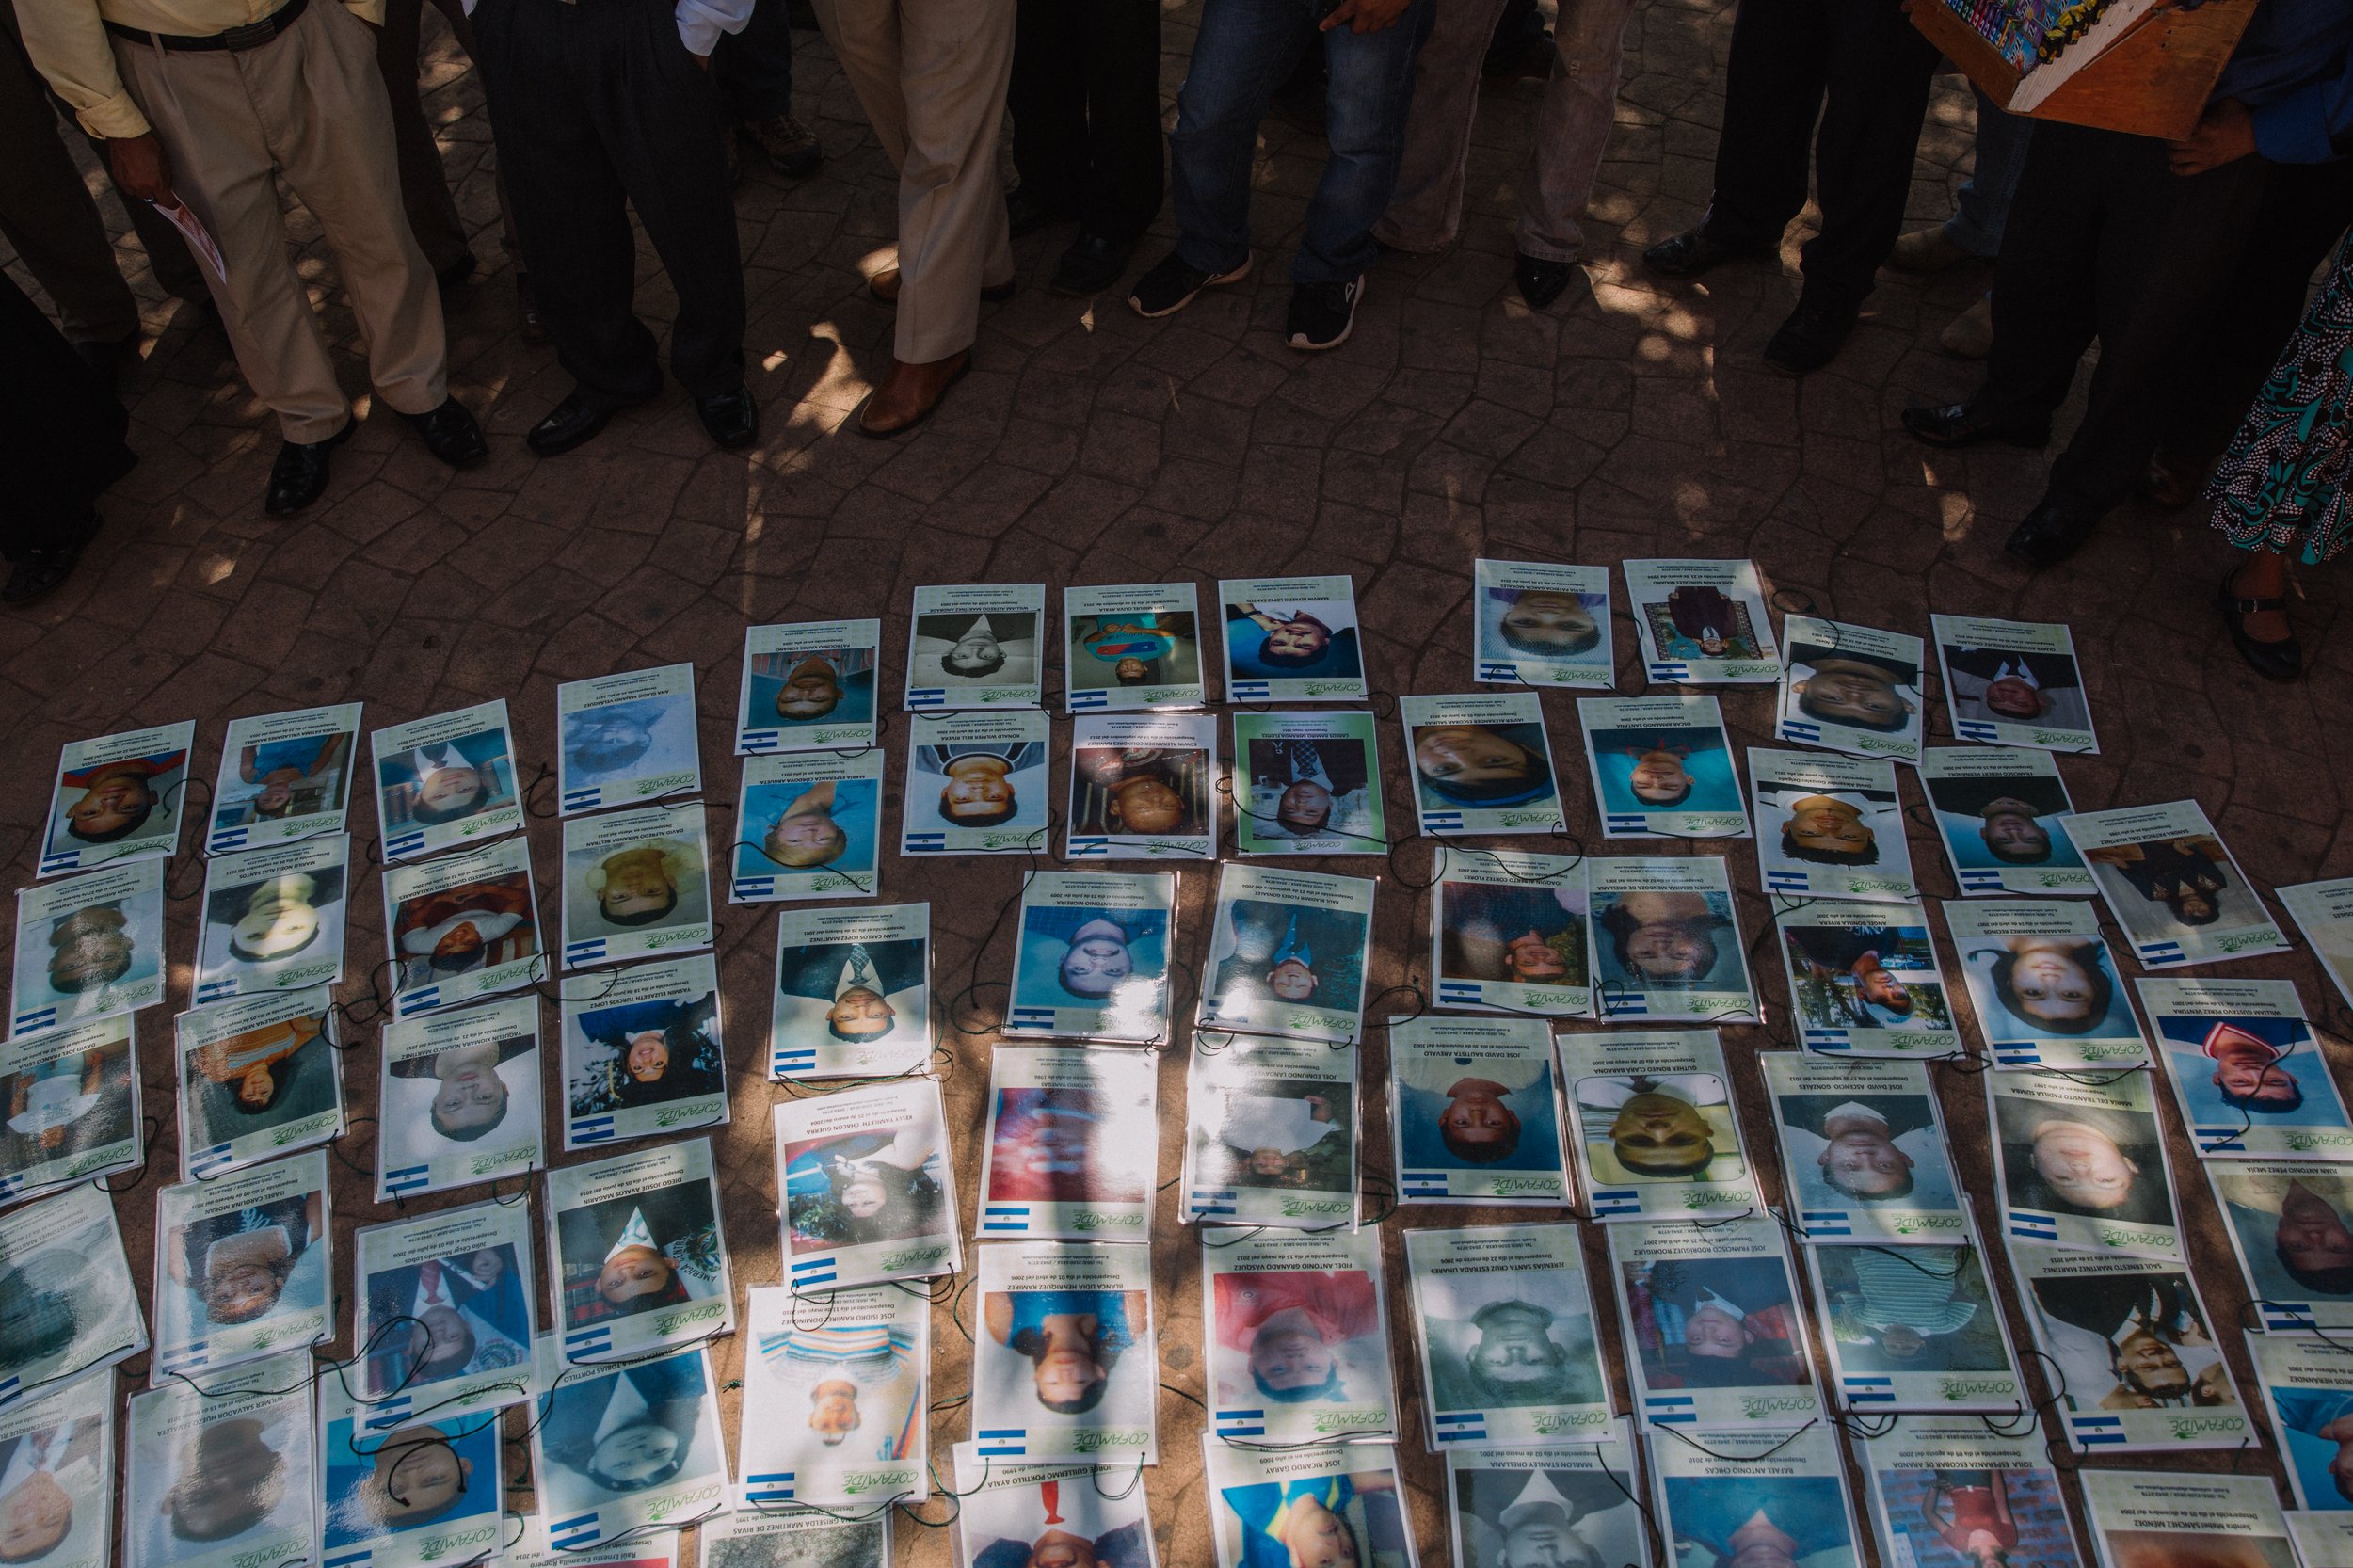  A crowd gathers in the town plaza of Chiapas, Mexico, to gaze upon the photos of missing migrants. For the Movimiento Migrante Mesoamericano, public exposure of these photos is crucial in the search for answers and justice. Press conferences and mar